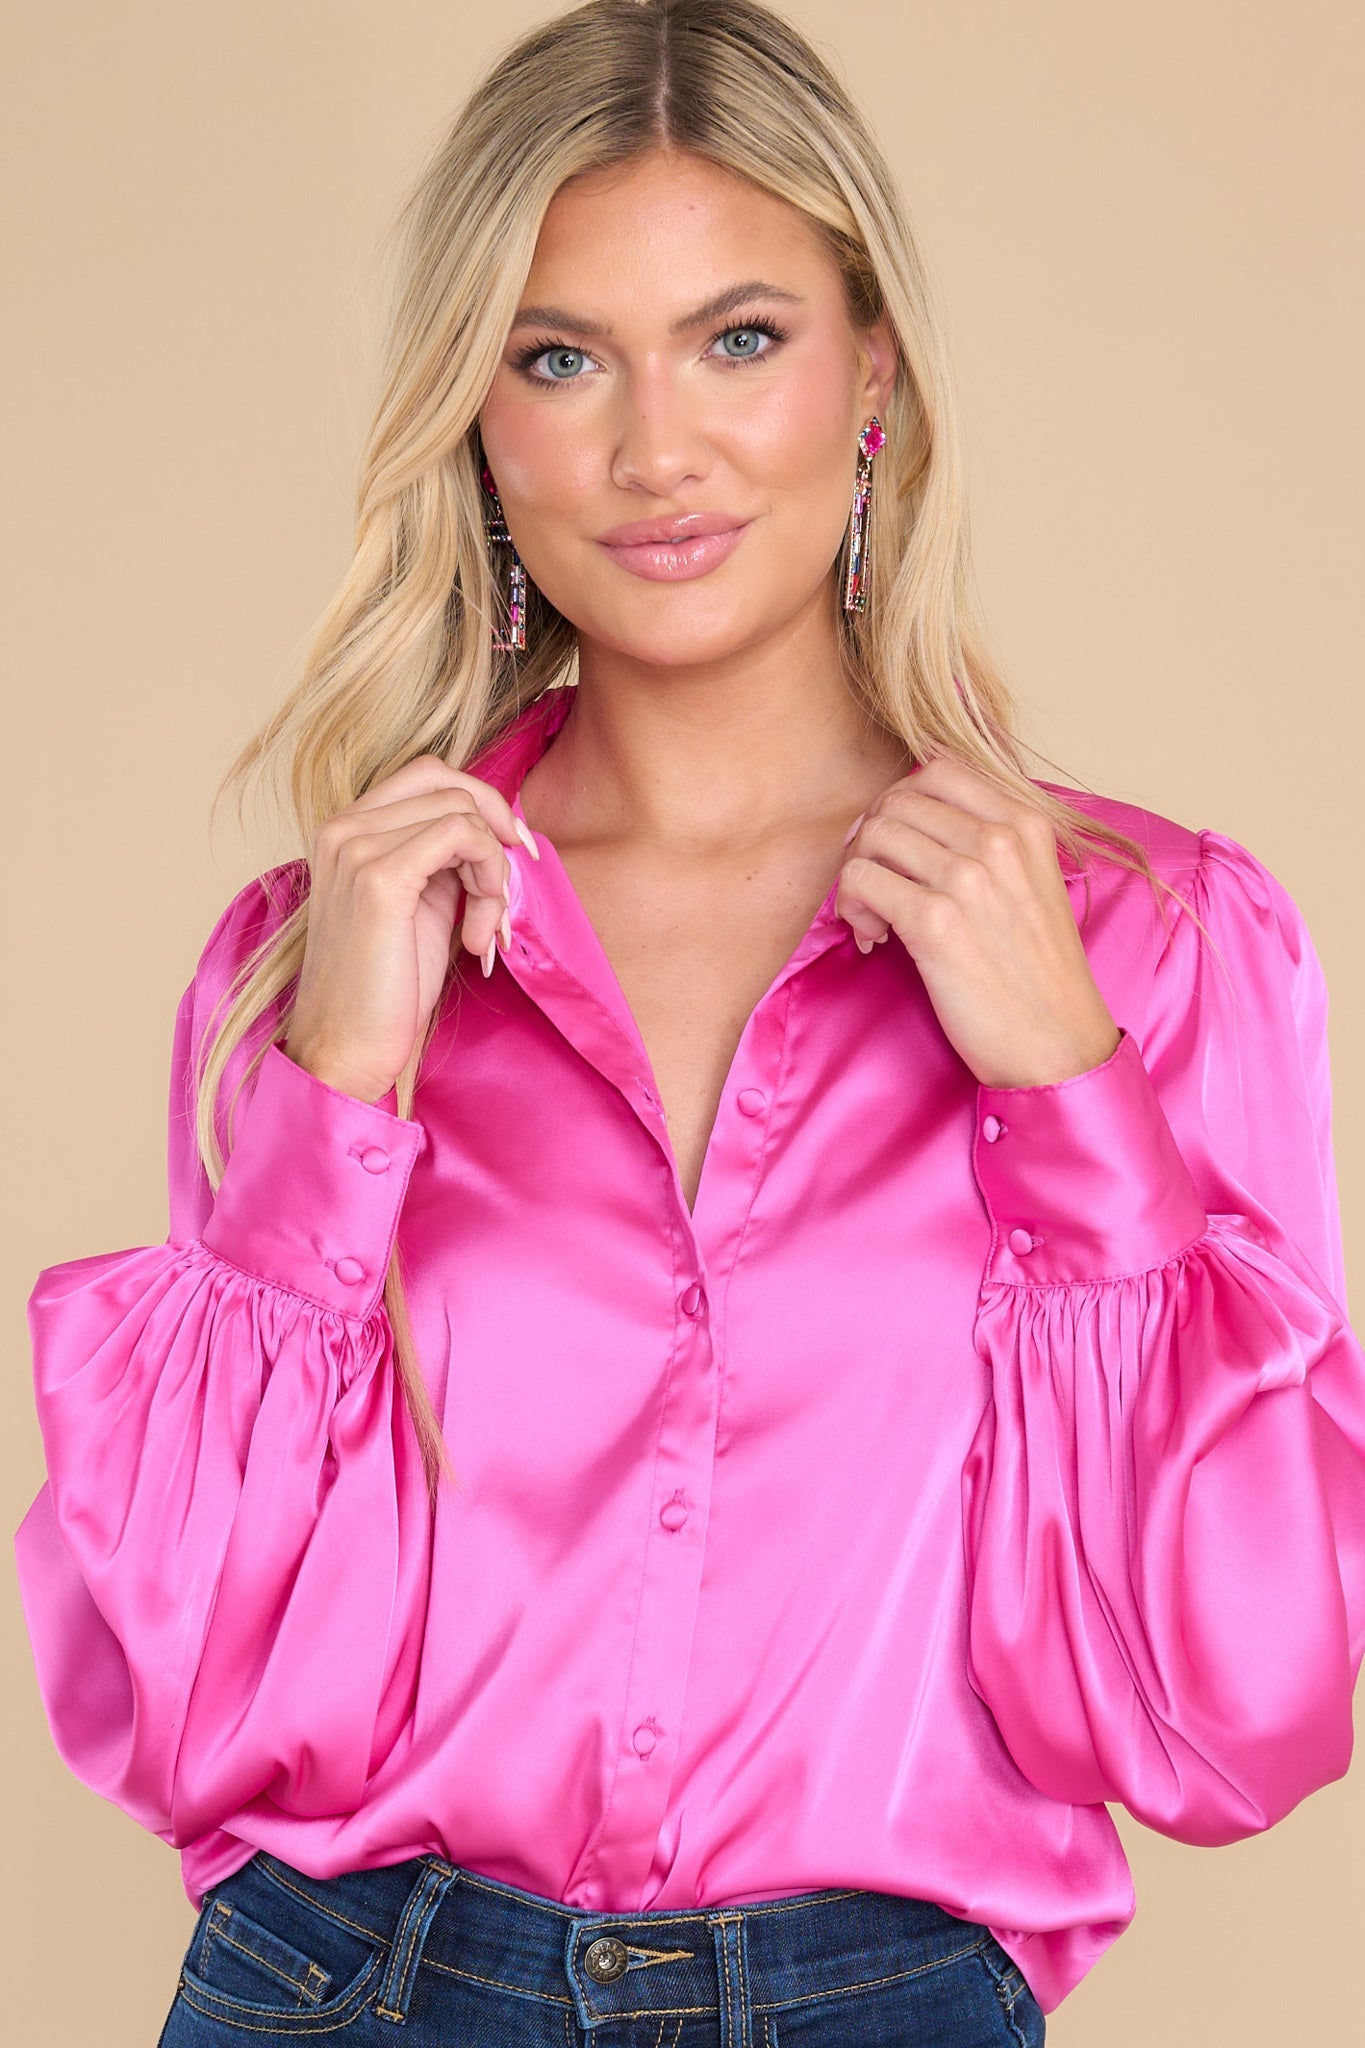 Blessed Events Hot Pink Top - Red Dress